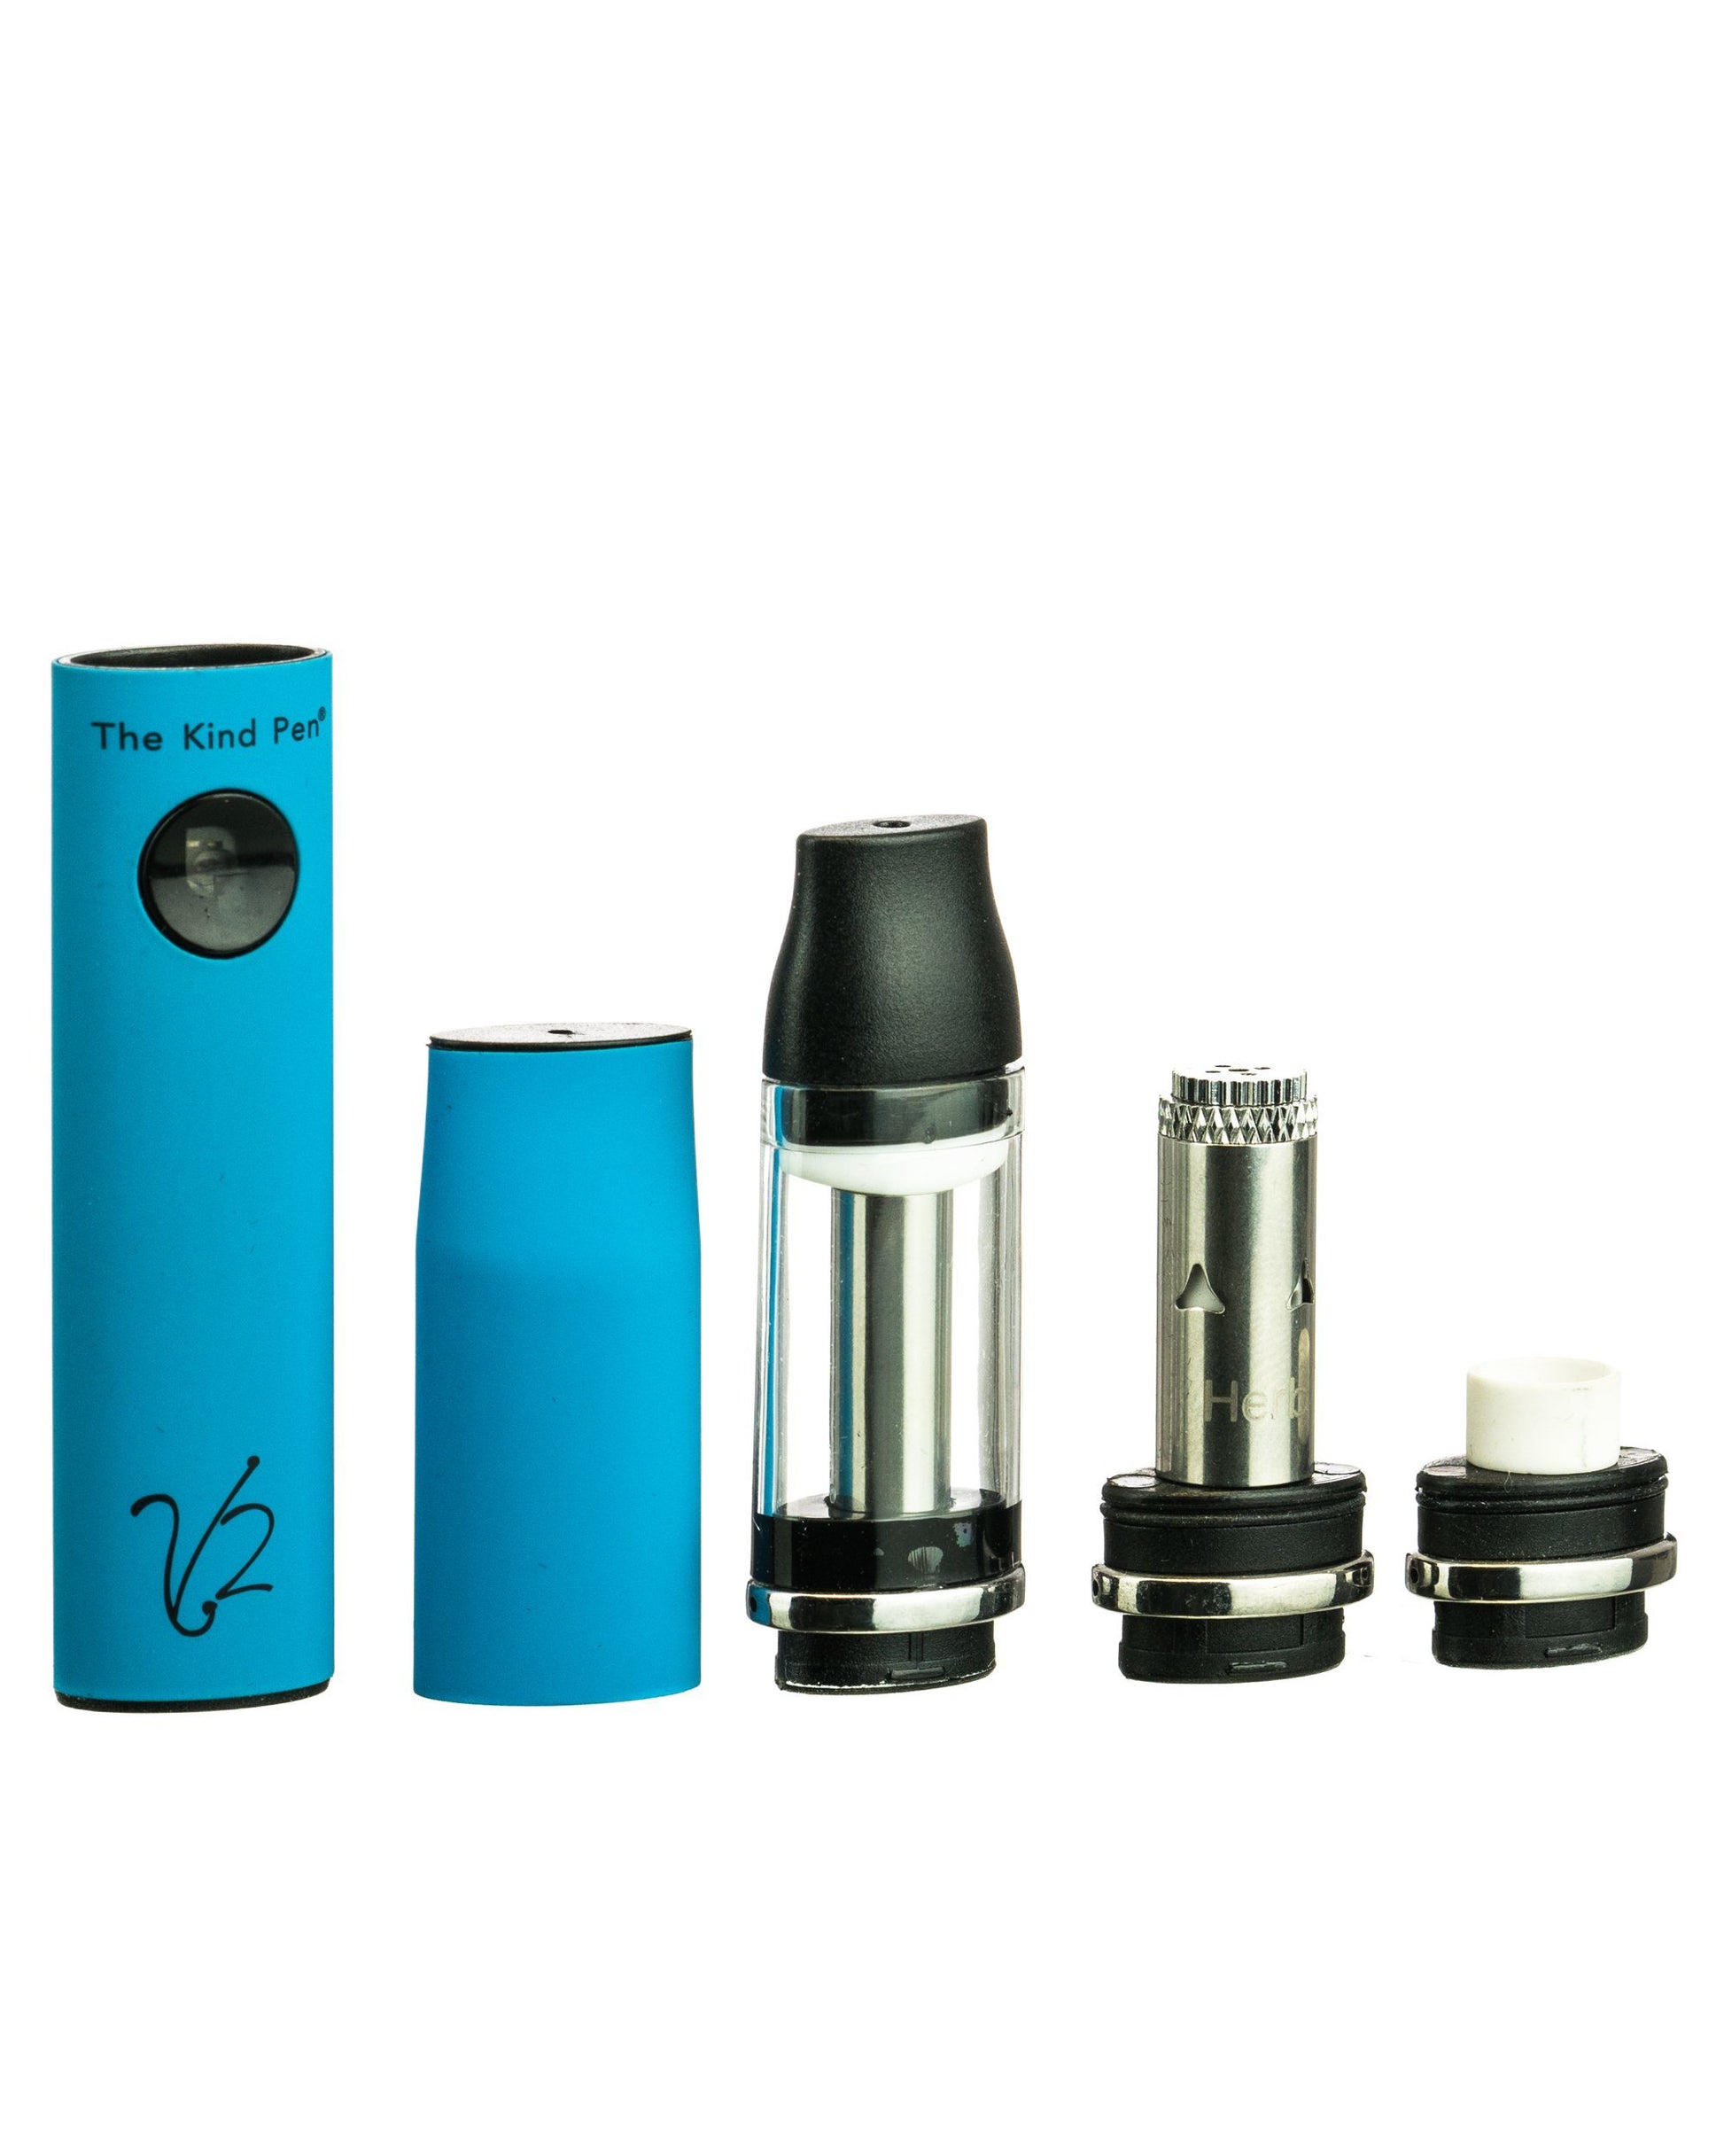 Tri-Use Vaporizer at Flower Power Packages